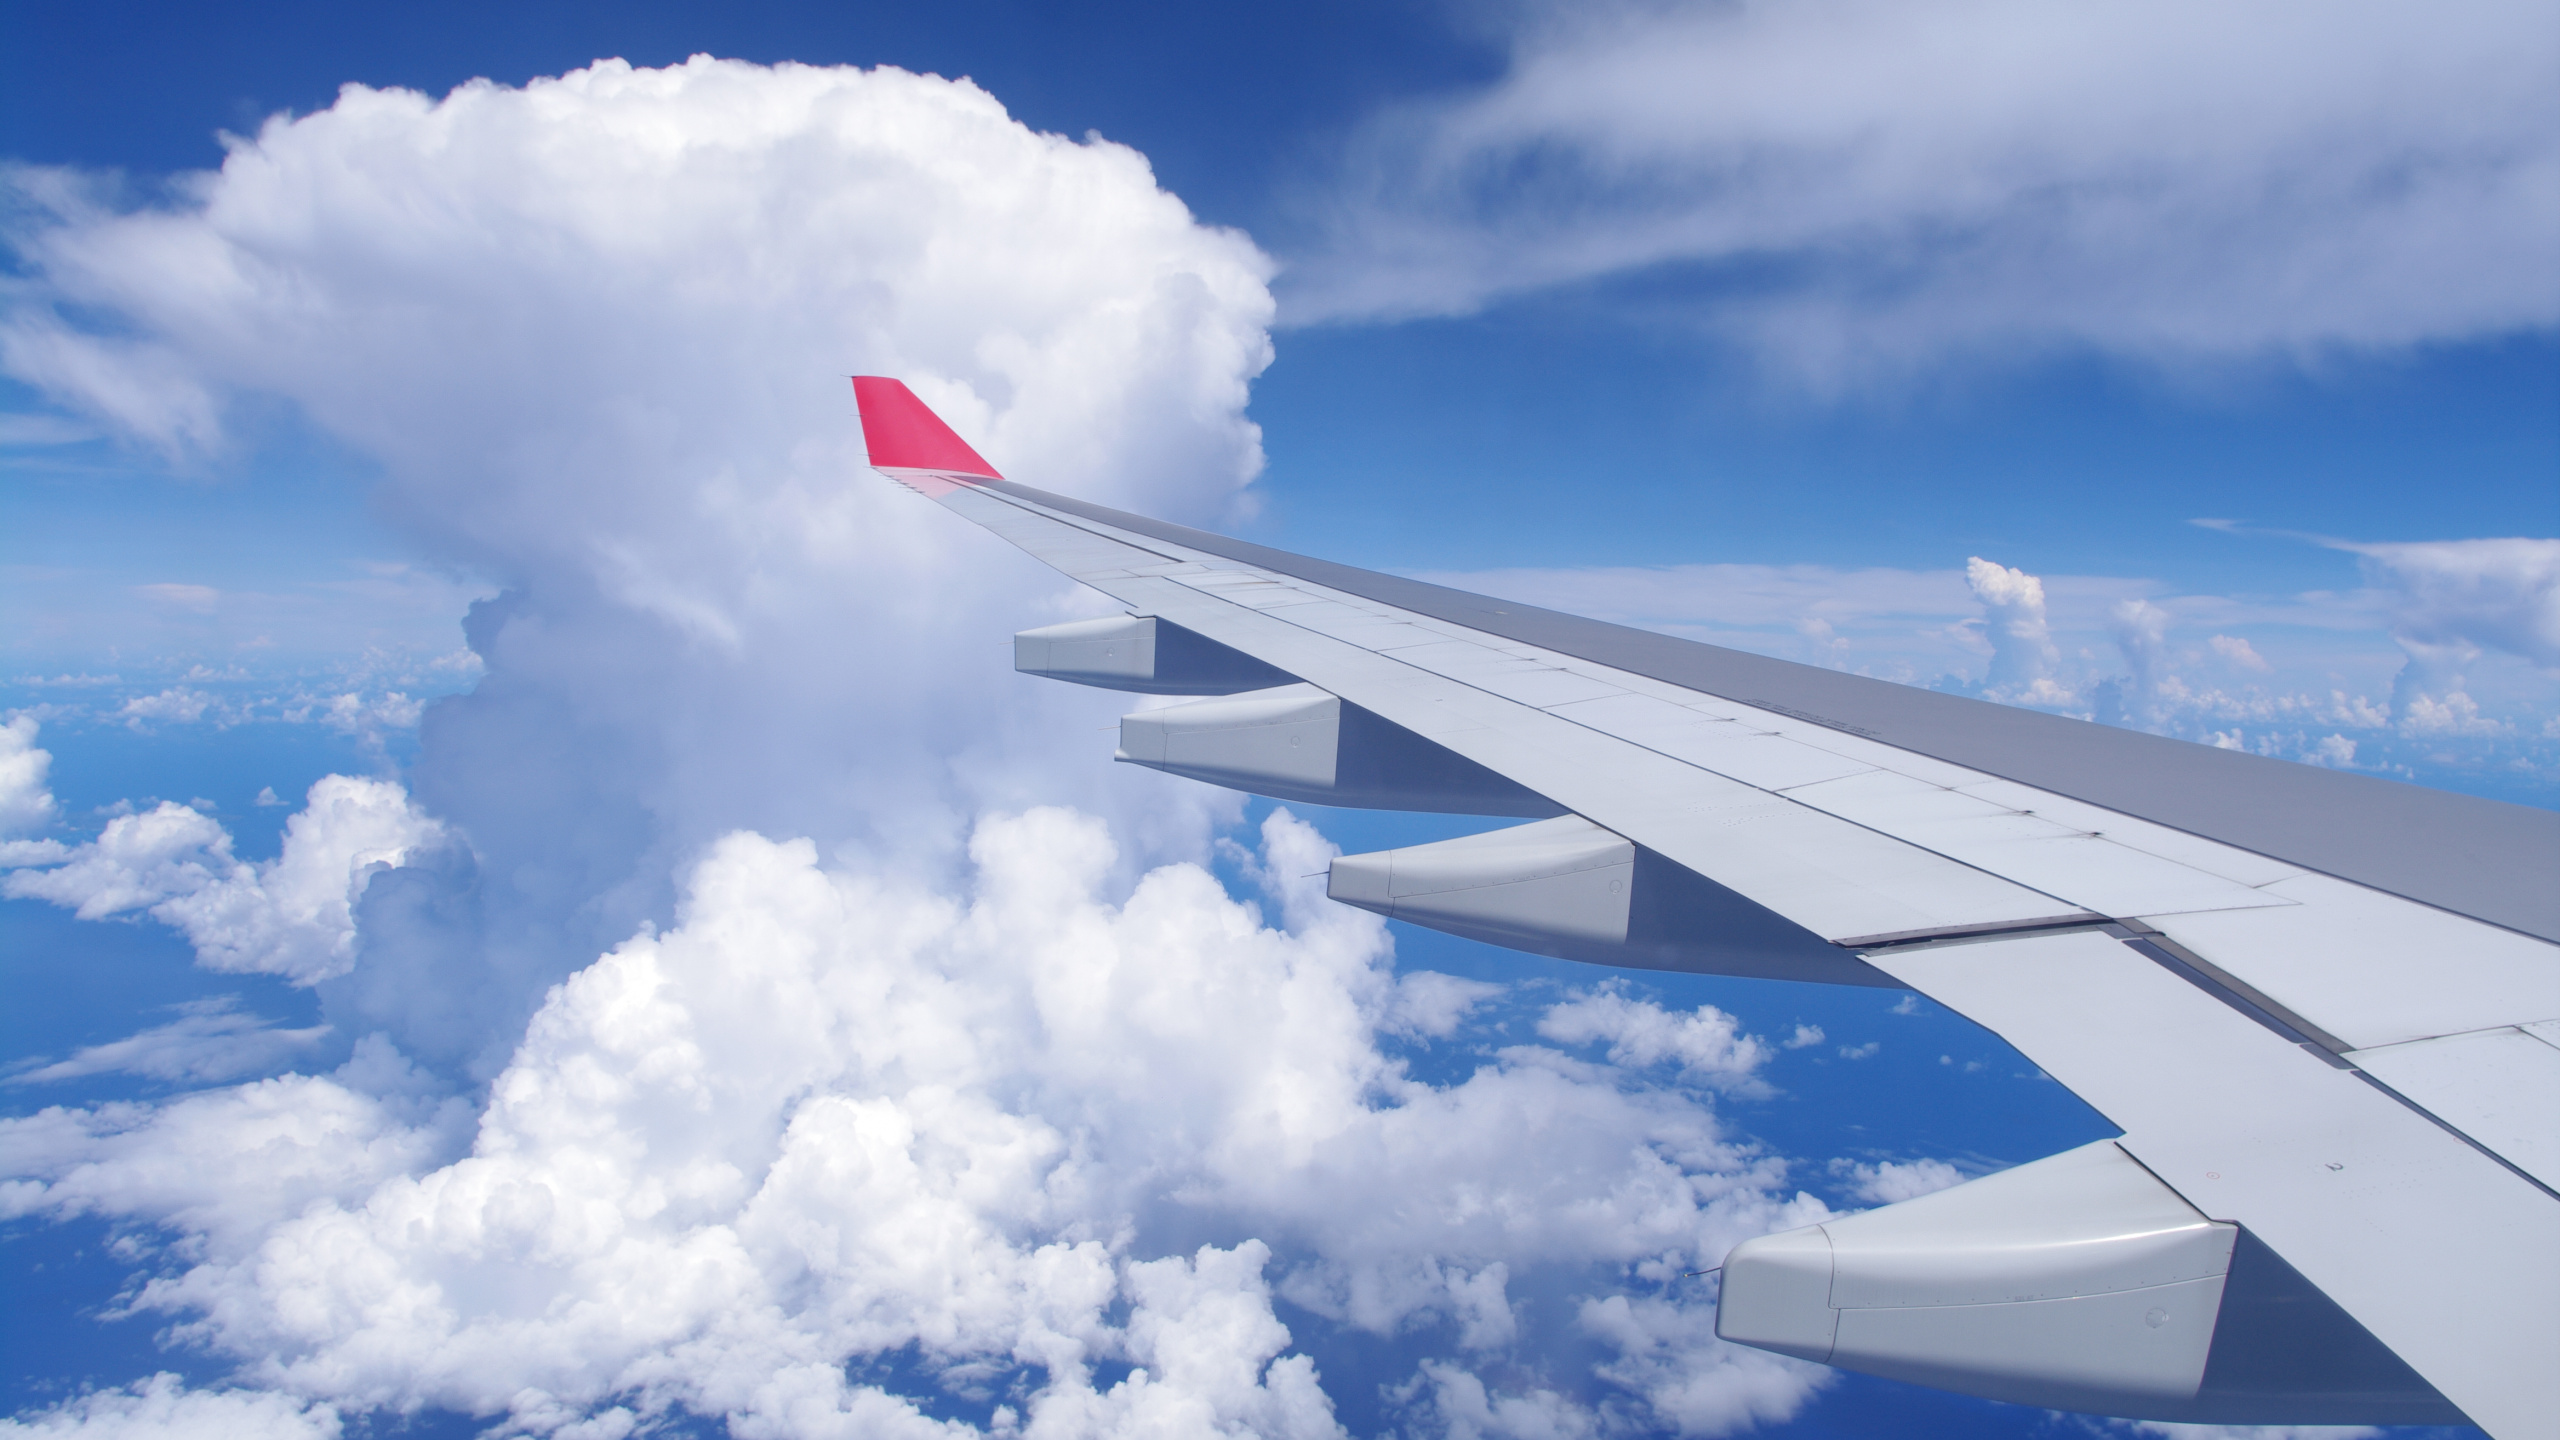 White and Red Airplane Wing Under Blue Sky and White Clouds During Daytime. Wallpaper in 2560x1440 Resolution